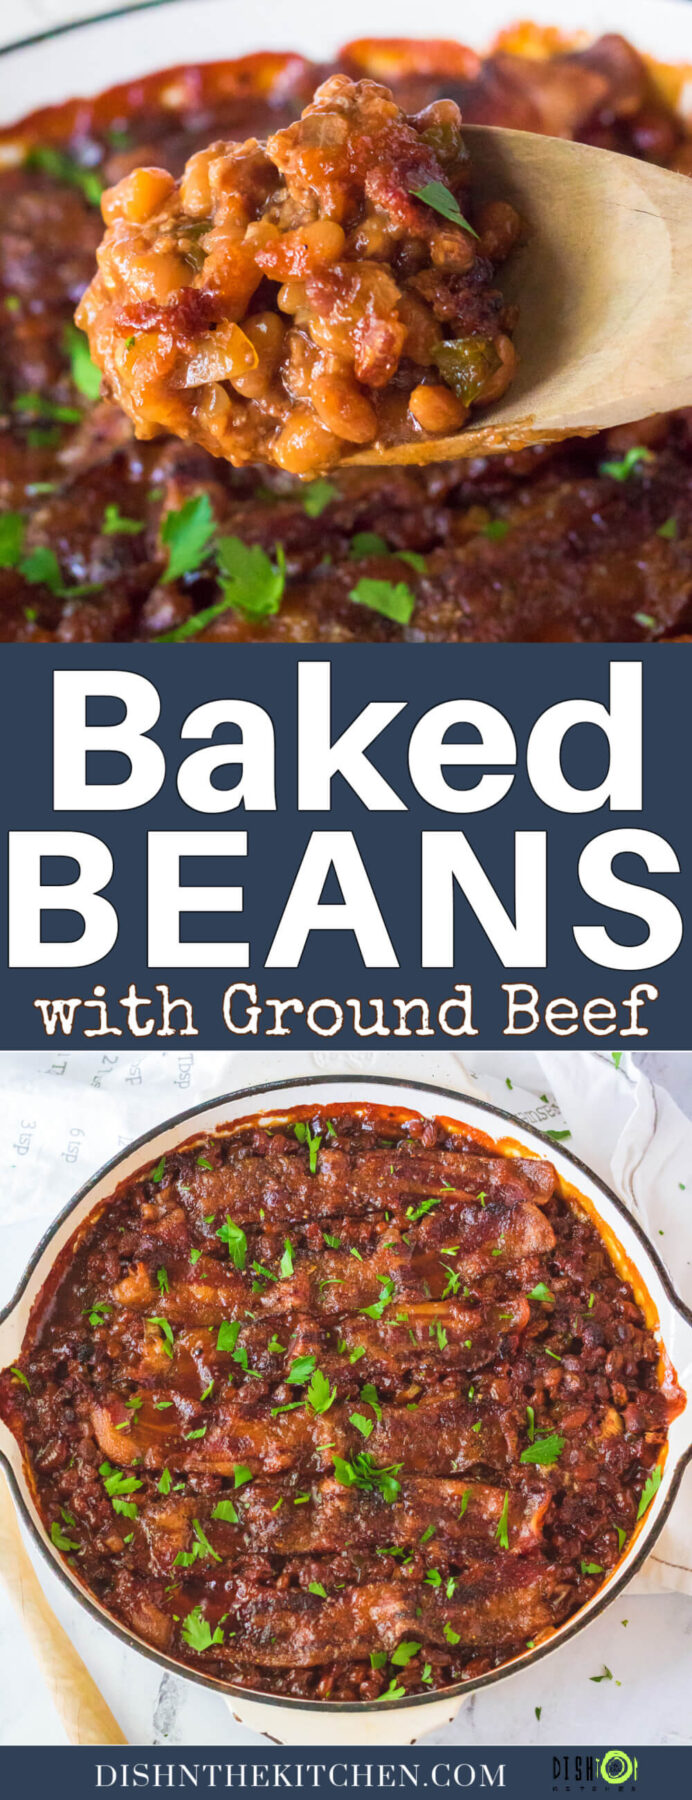 Pinterest image featuring a wooden spoon full of Baked Beans with Ground Beef.